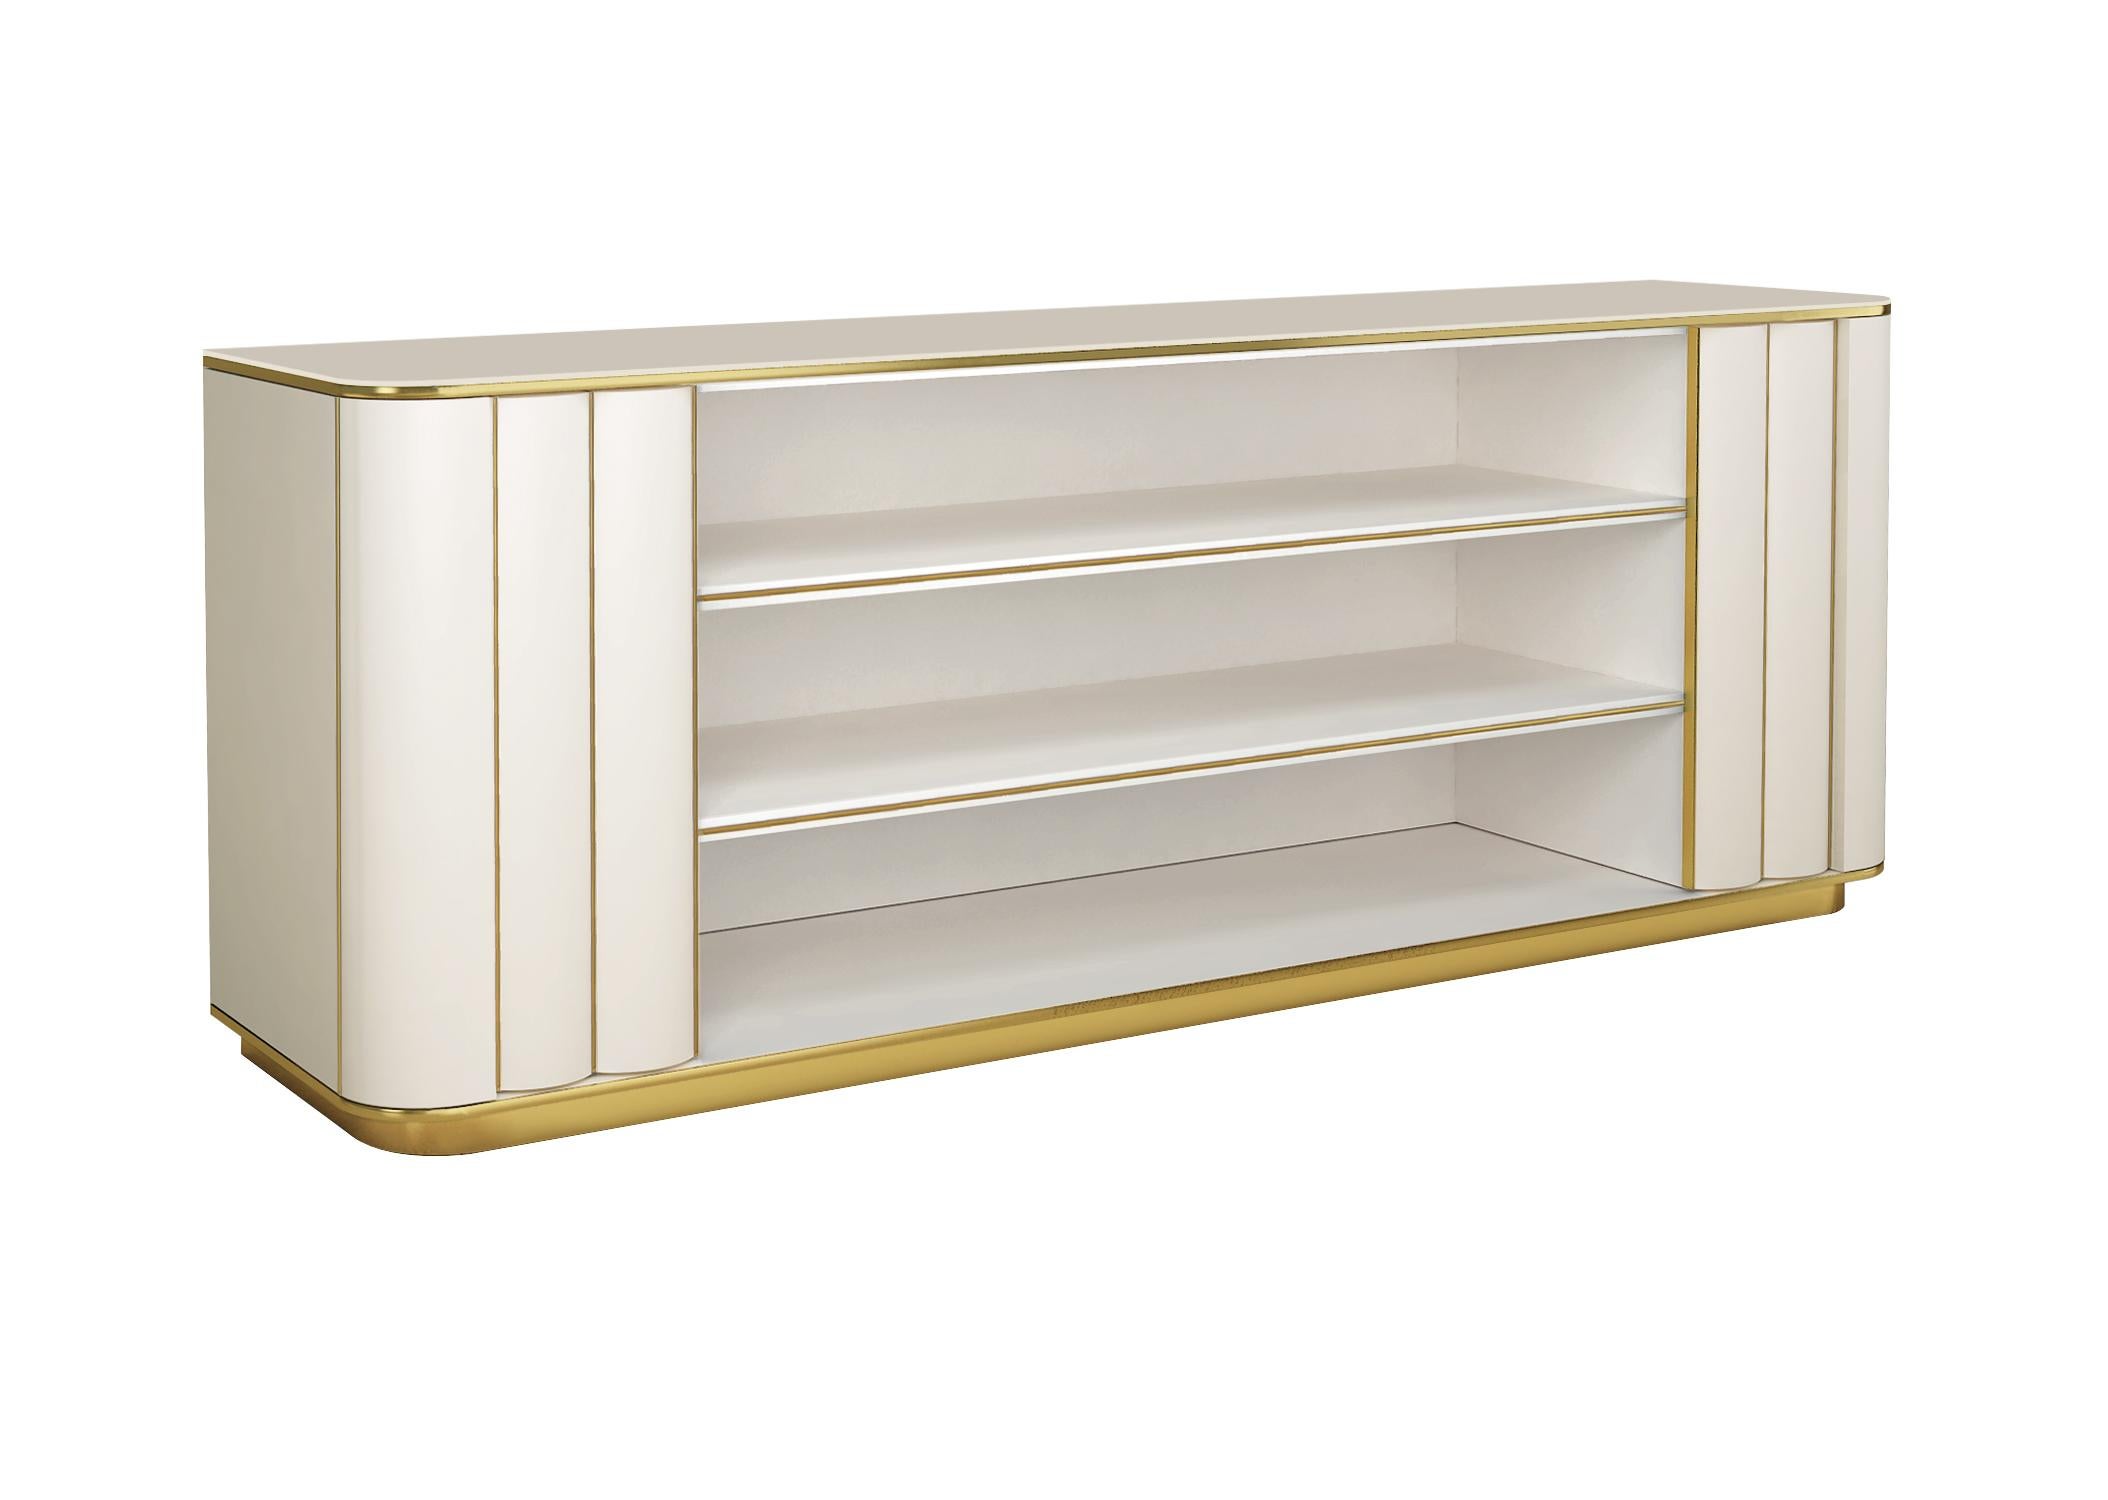 Designed by IC and beautifully crafted by Italian artisans, the Duilio bookcase features an open compartment with two large shelves embraced by ribbed doors on the sides. The brass, or powder coated metal, details and a stunning design will bring